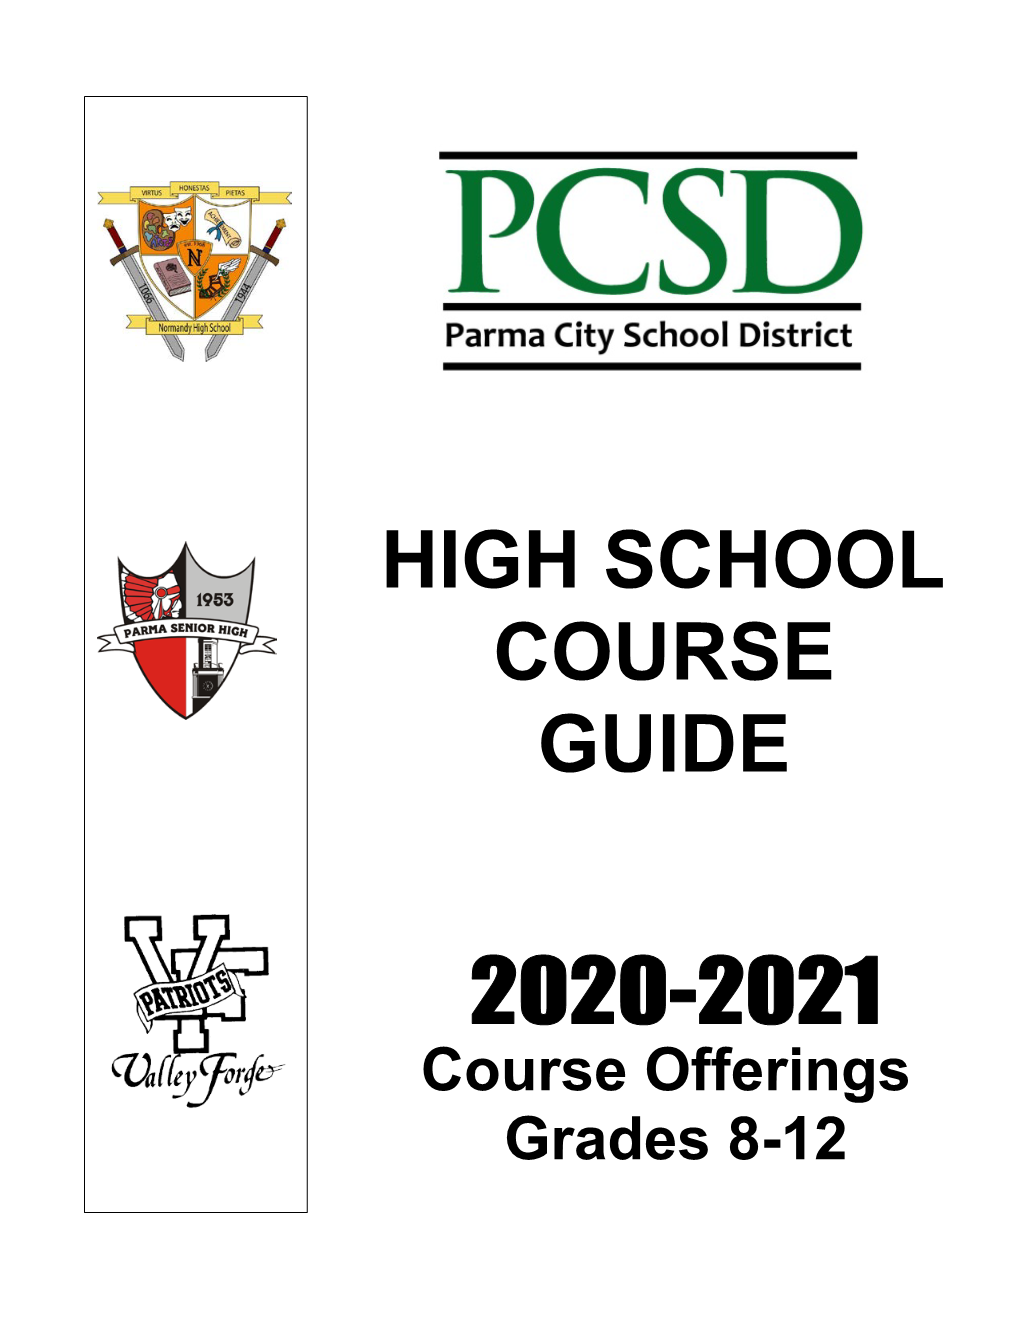 Course Offerings Grades 8-12